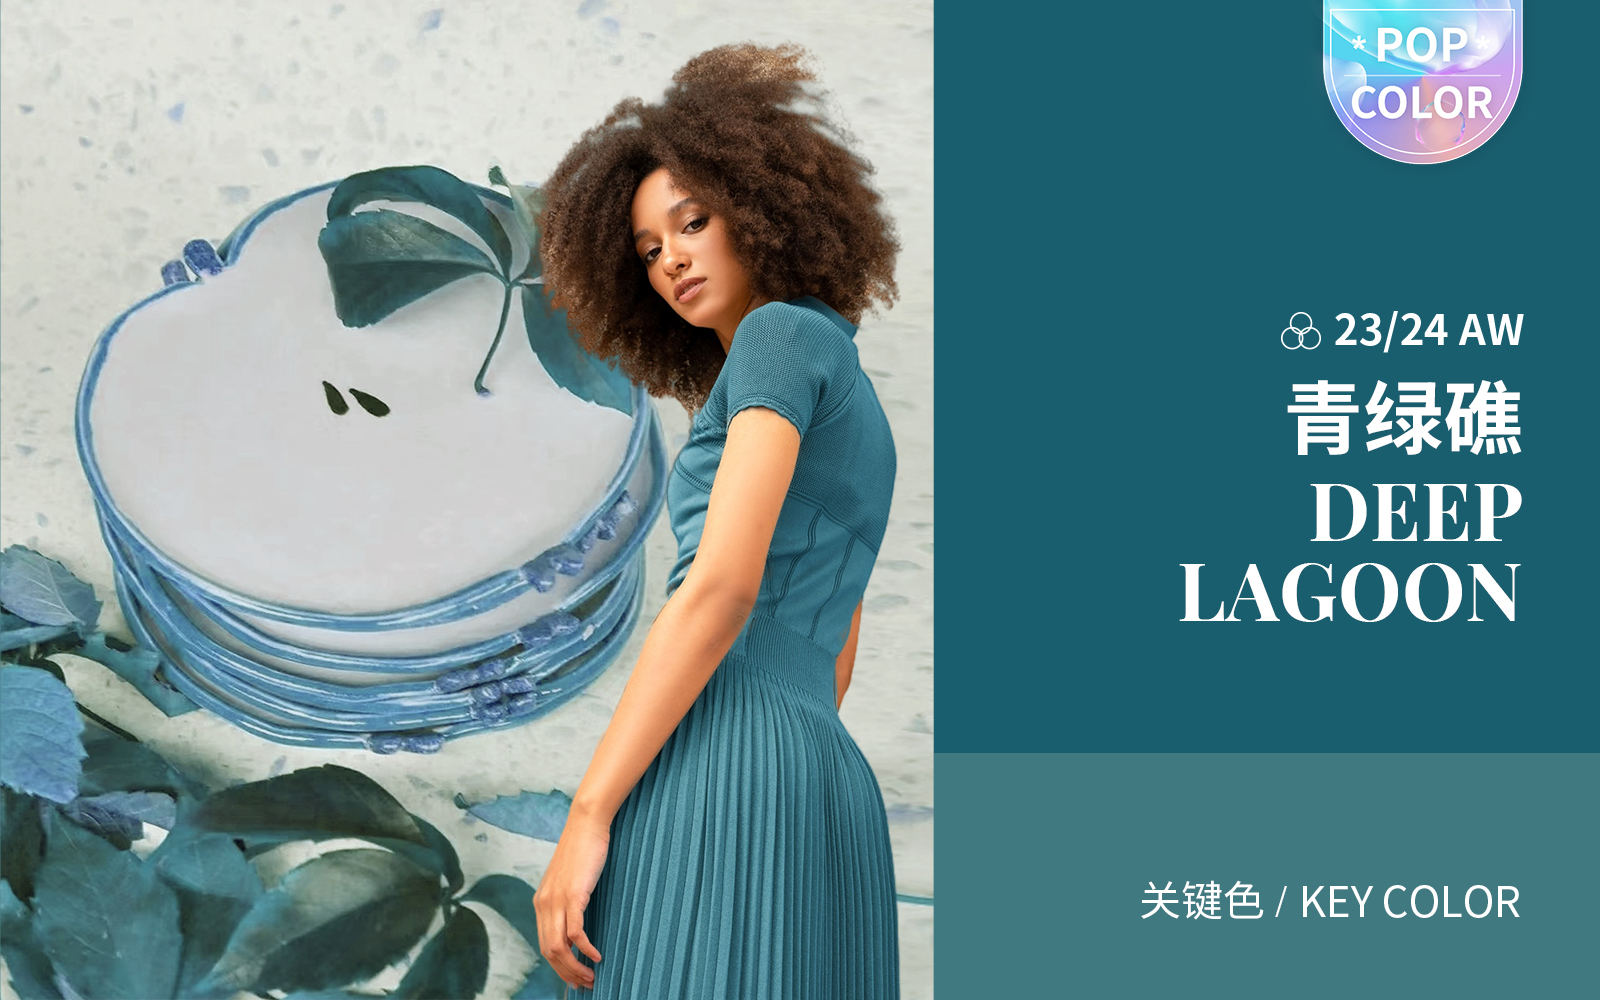 Deep Lagoon -- The Color Trend for Mature Women's Knitwear